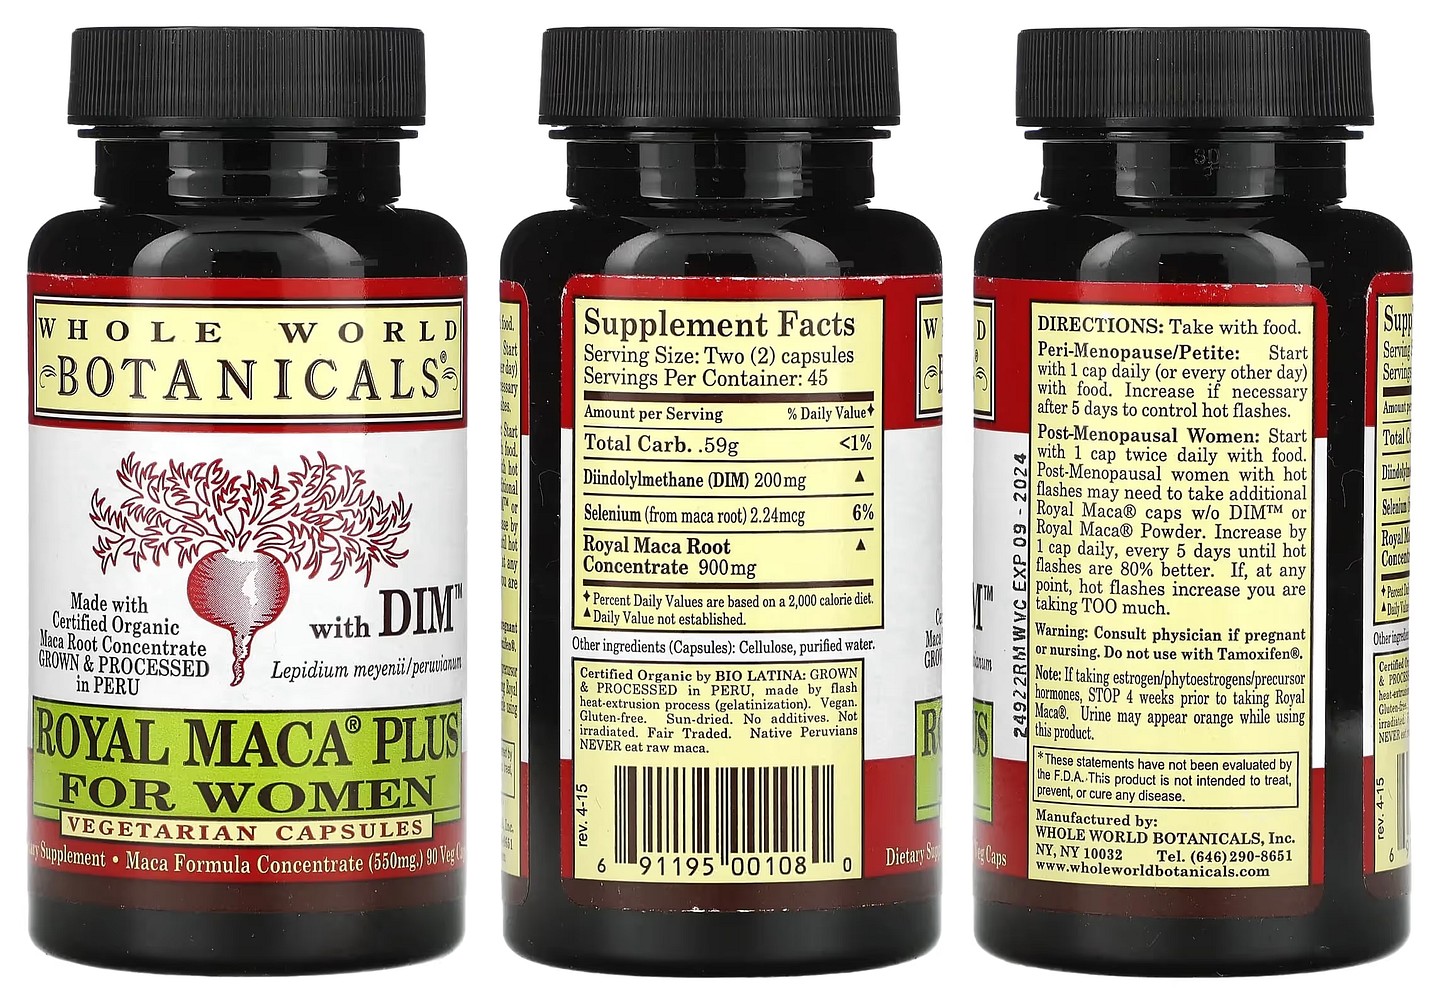 Whole World Botanicals, Royal Maca Plus with DIM for Women packaging